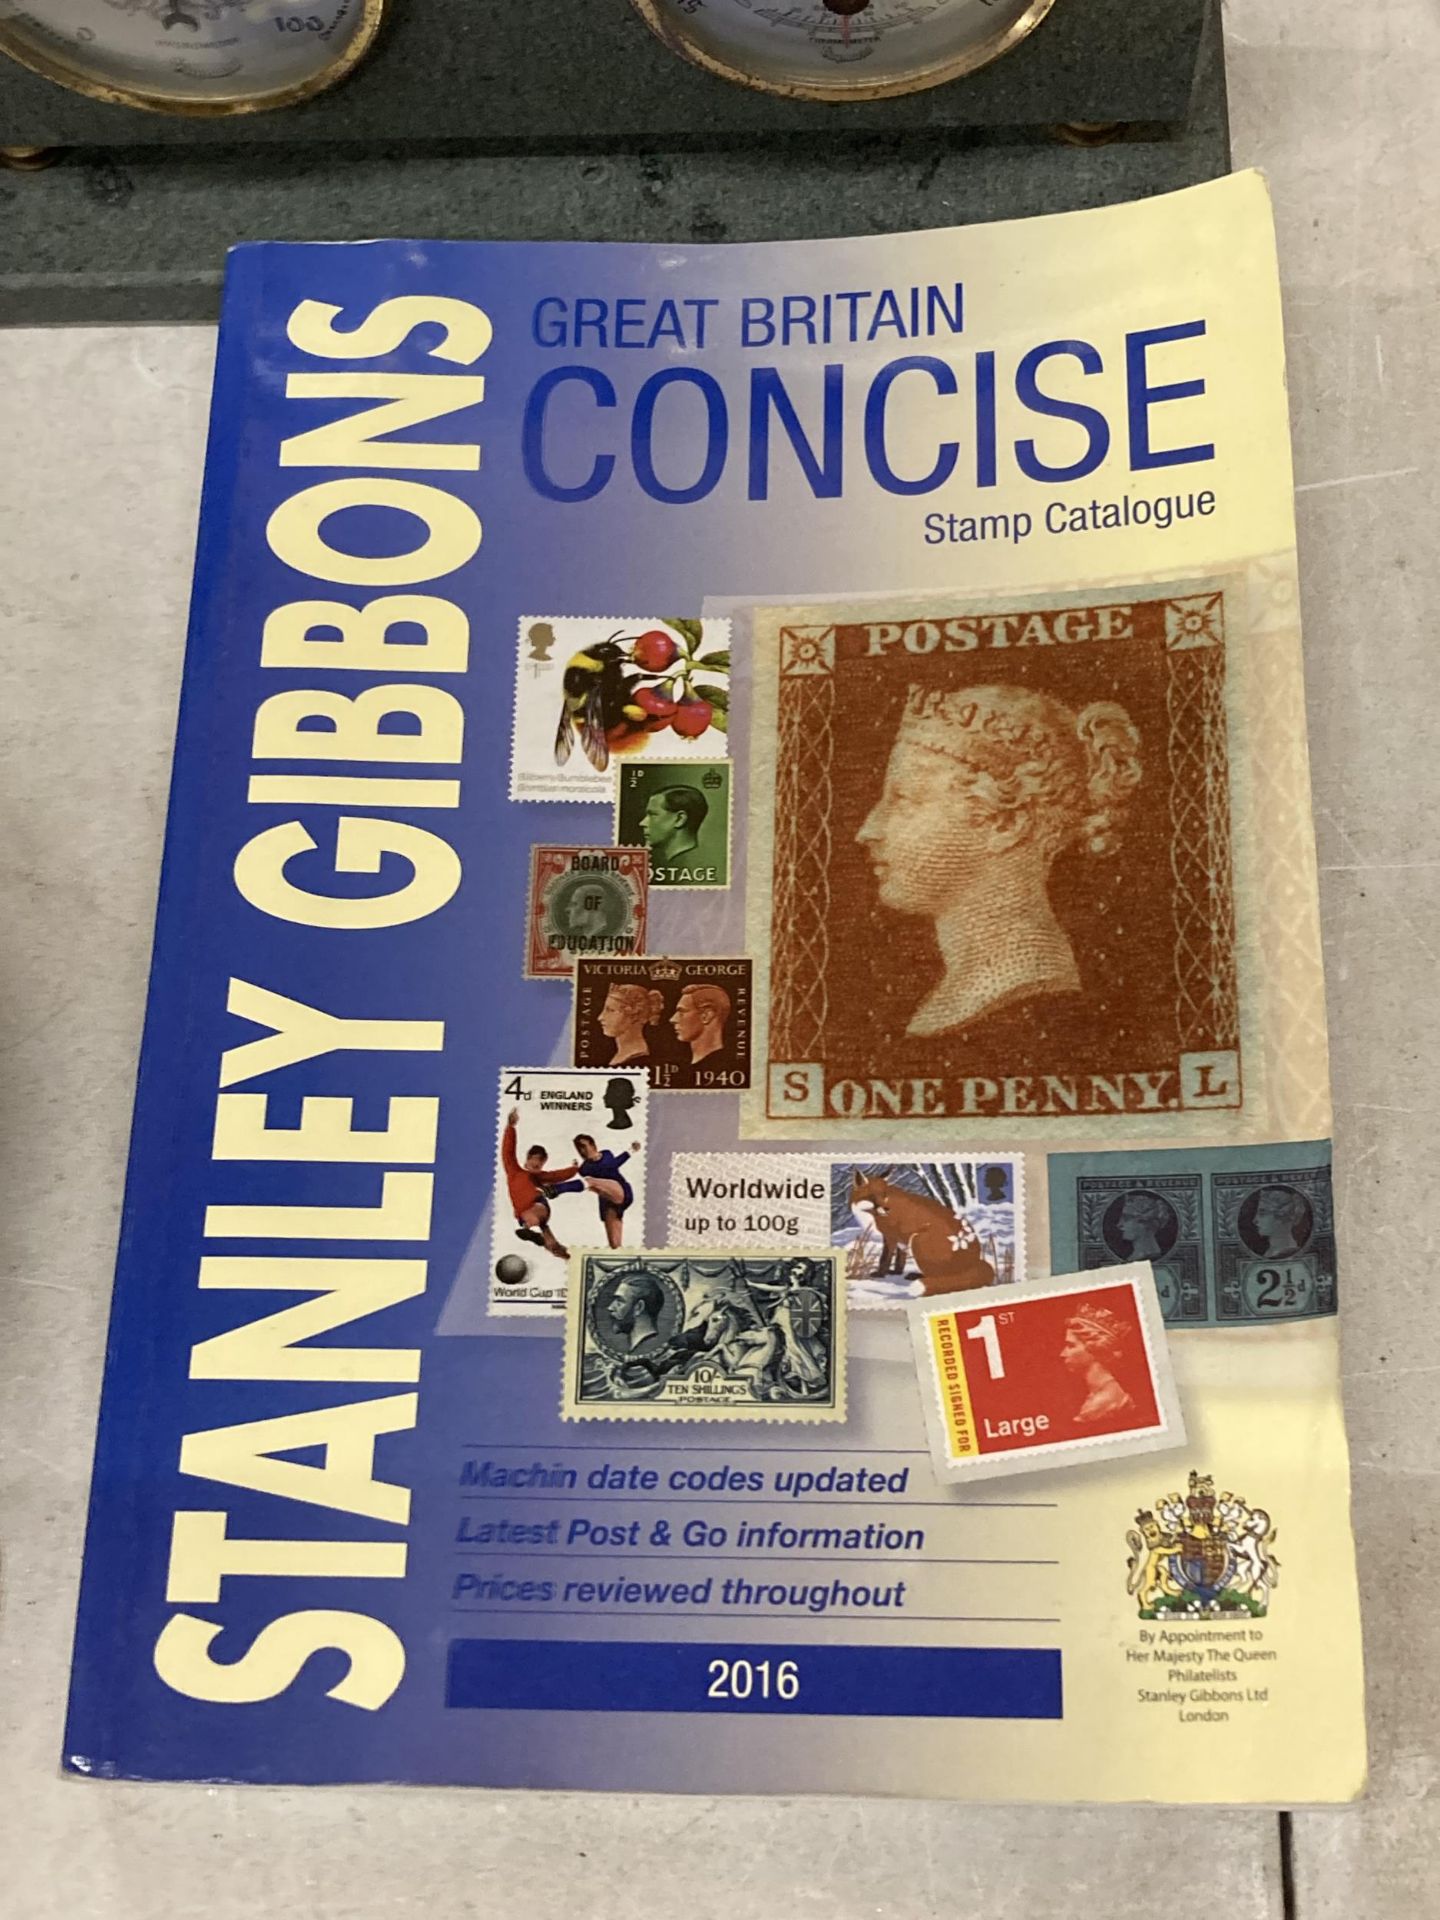 A STANLEY GIBBONS GREAT BRITAIN 2016 CONCISE STAMP CATALOGUE